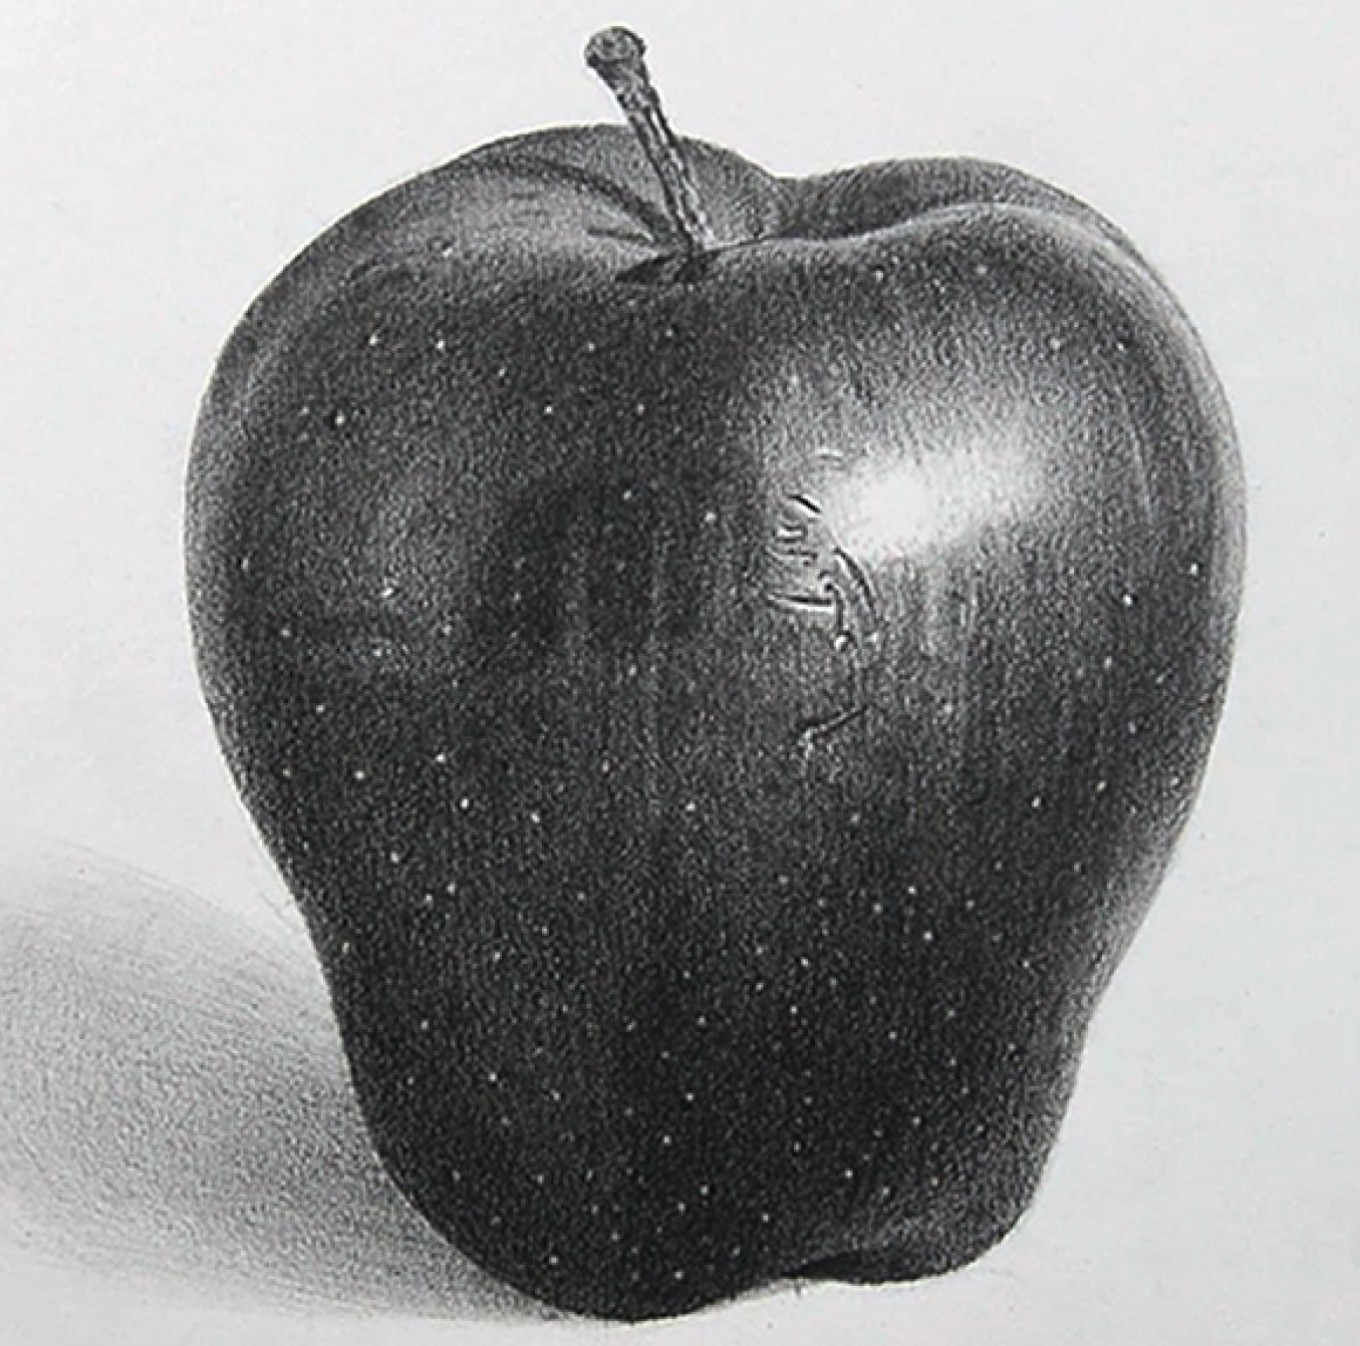 How to Draw an Apple Step by Step  EasyLineDrawing